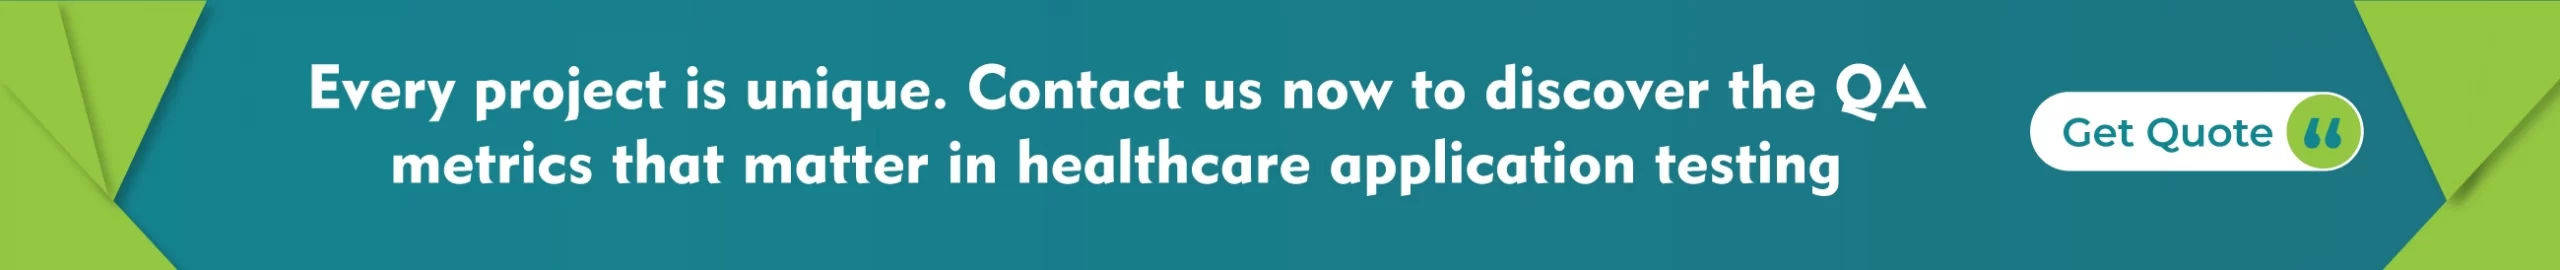 Every project is unique Contact us now to discover the QA metrics that matter in healthcare application testing